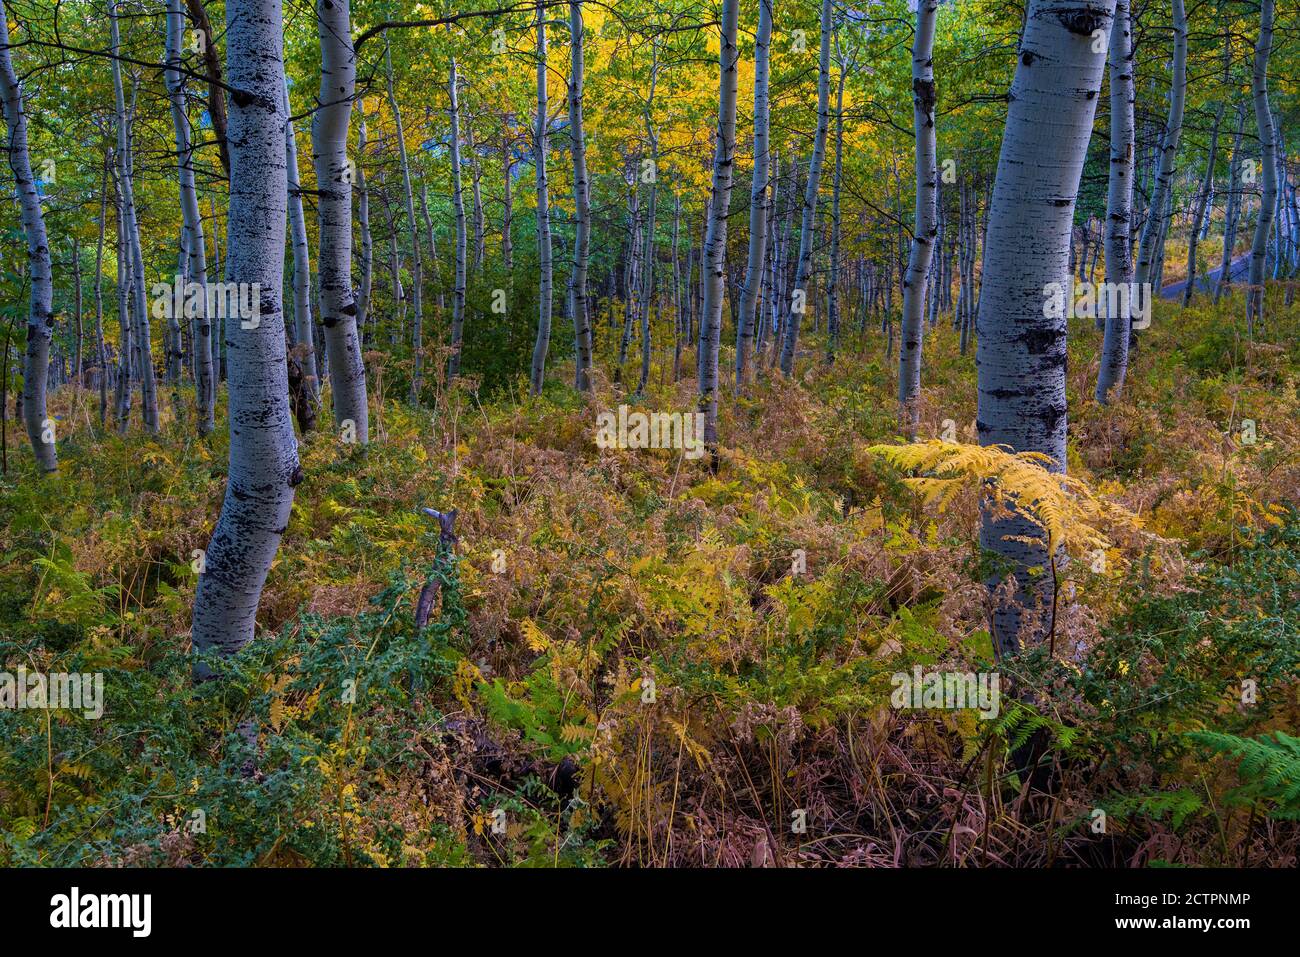 Subtle Autumn colors with Quaking Aspen and Western Bracken Fern. Stock Photo